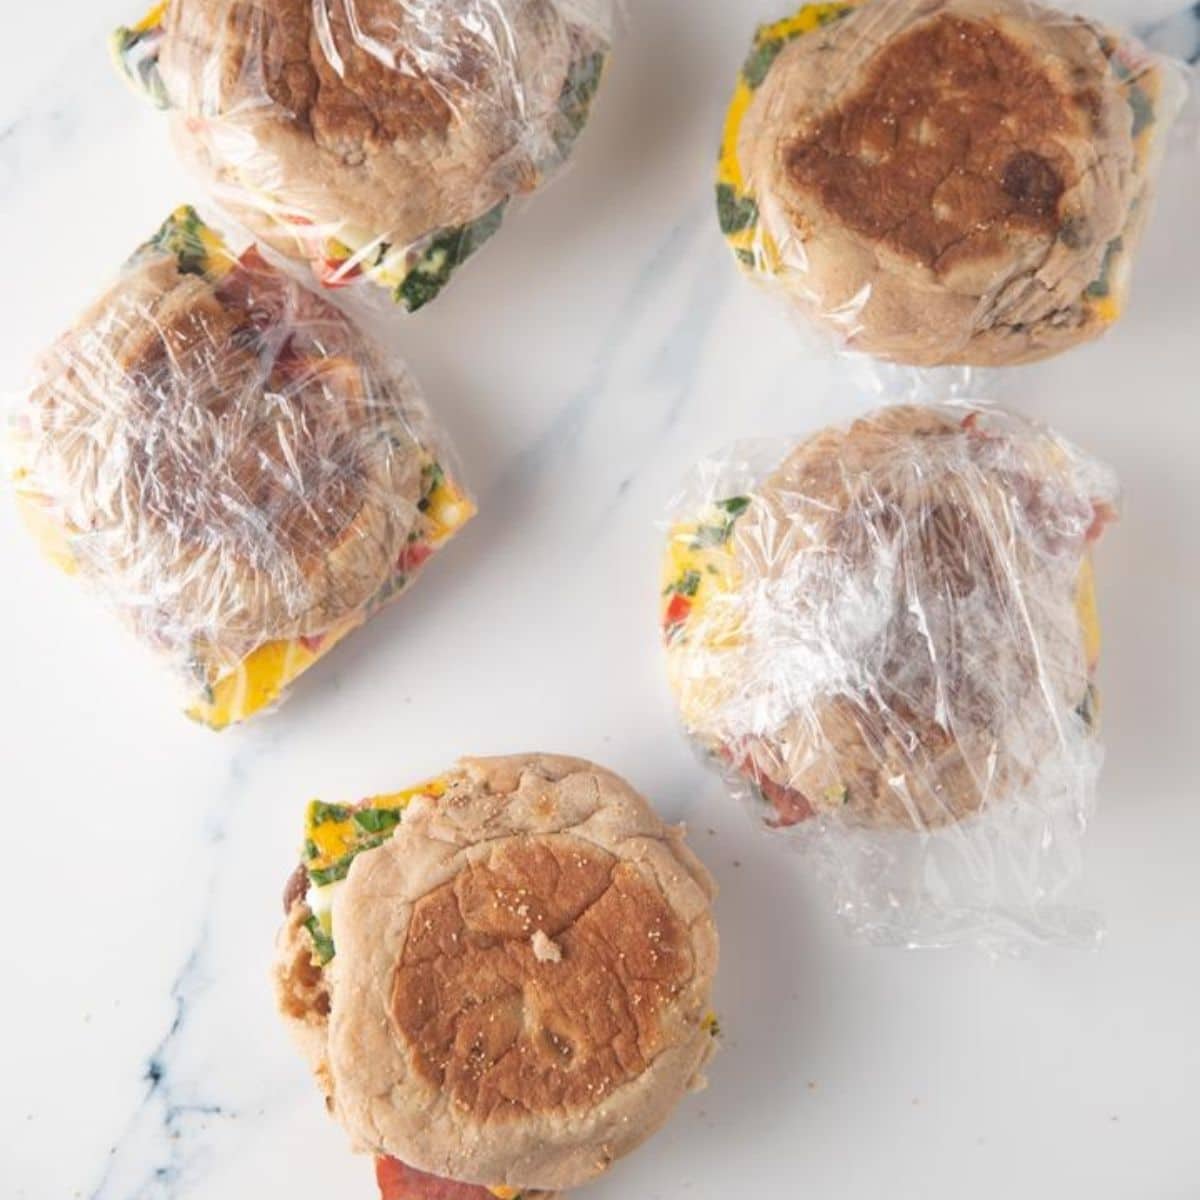 How To Store Homemade Breakfast Sandwiches